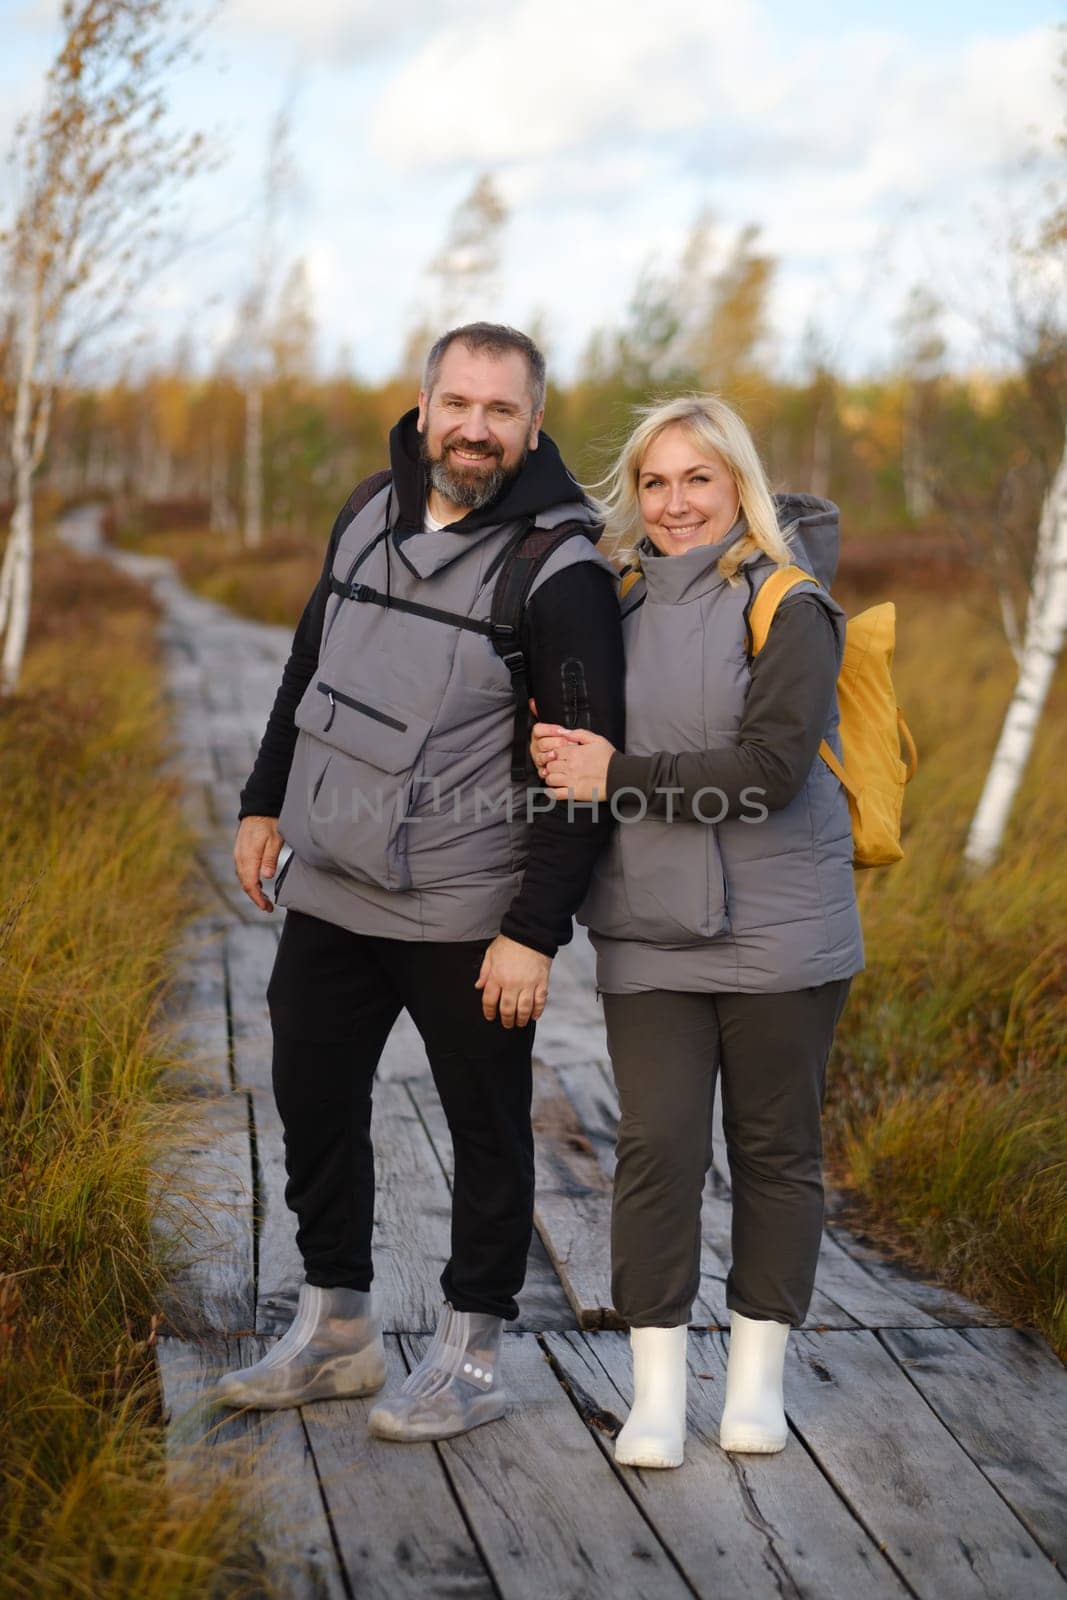 People in boots stand hugging on a wooden path in a swamp in Yelnya, Belarus.